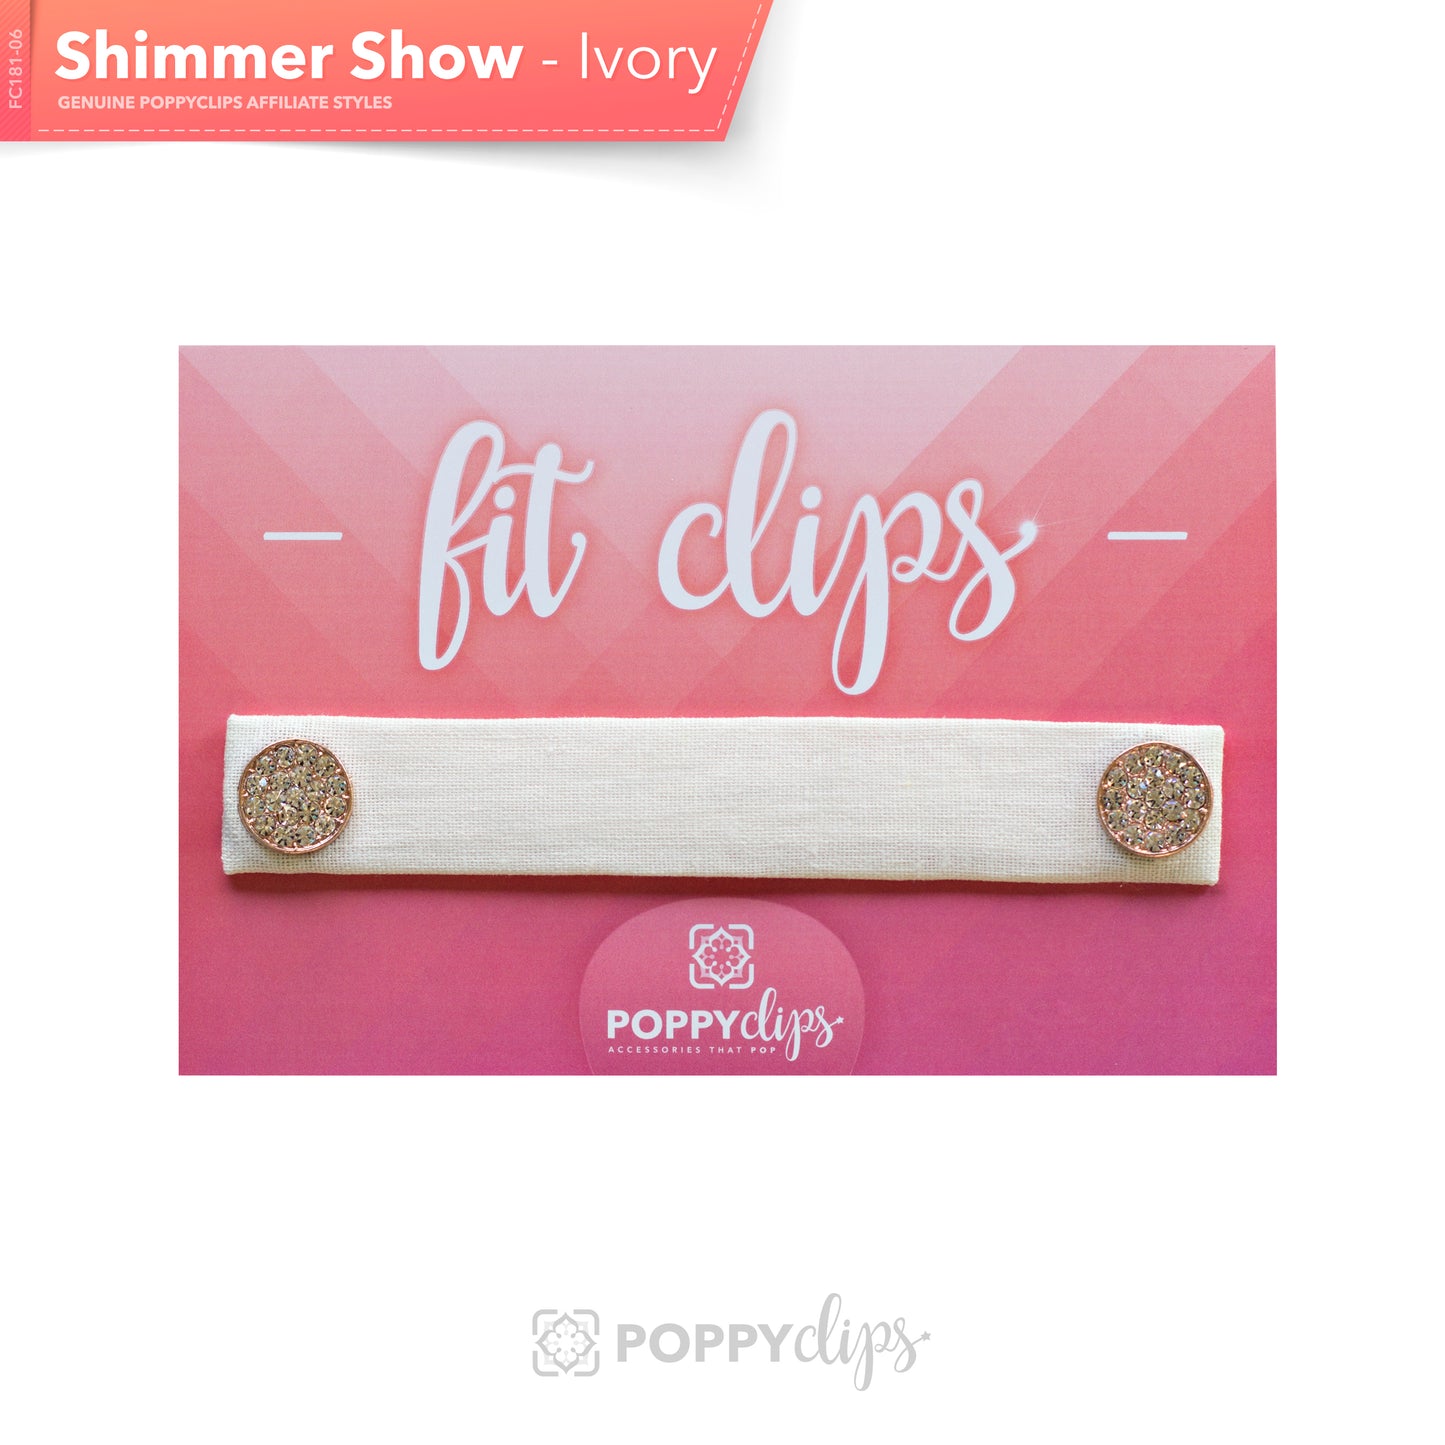 FitClips: Shimmer Show - ivory